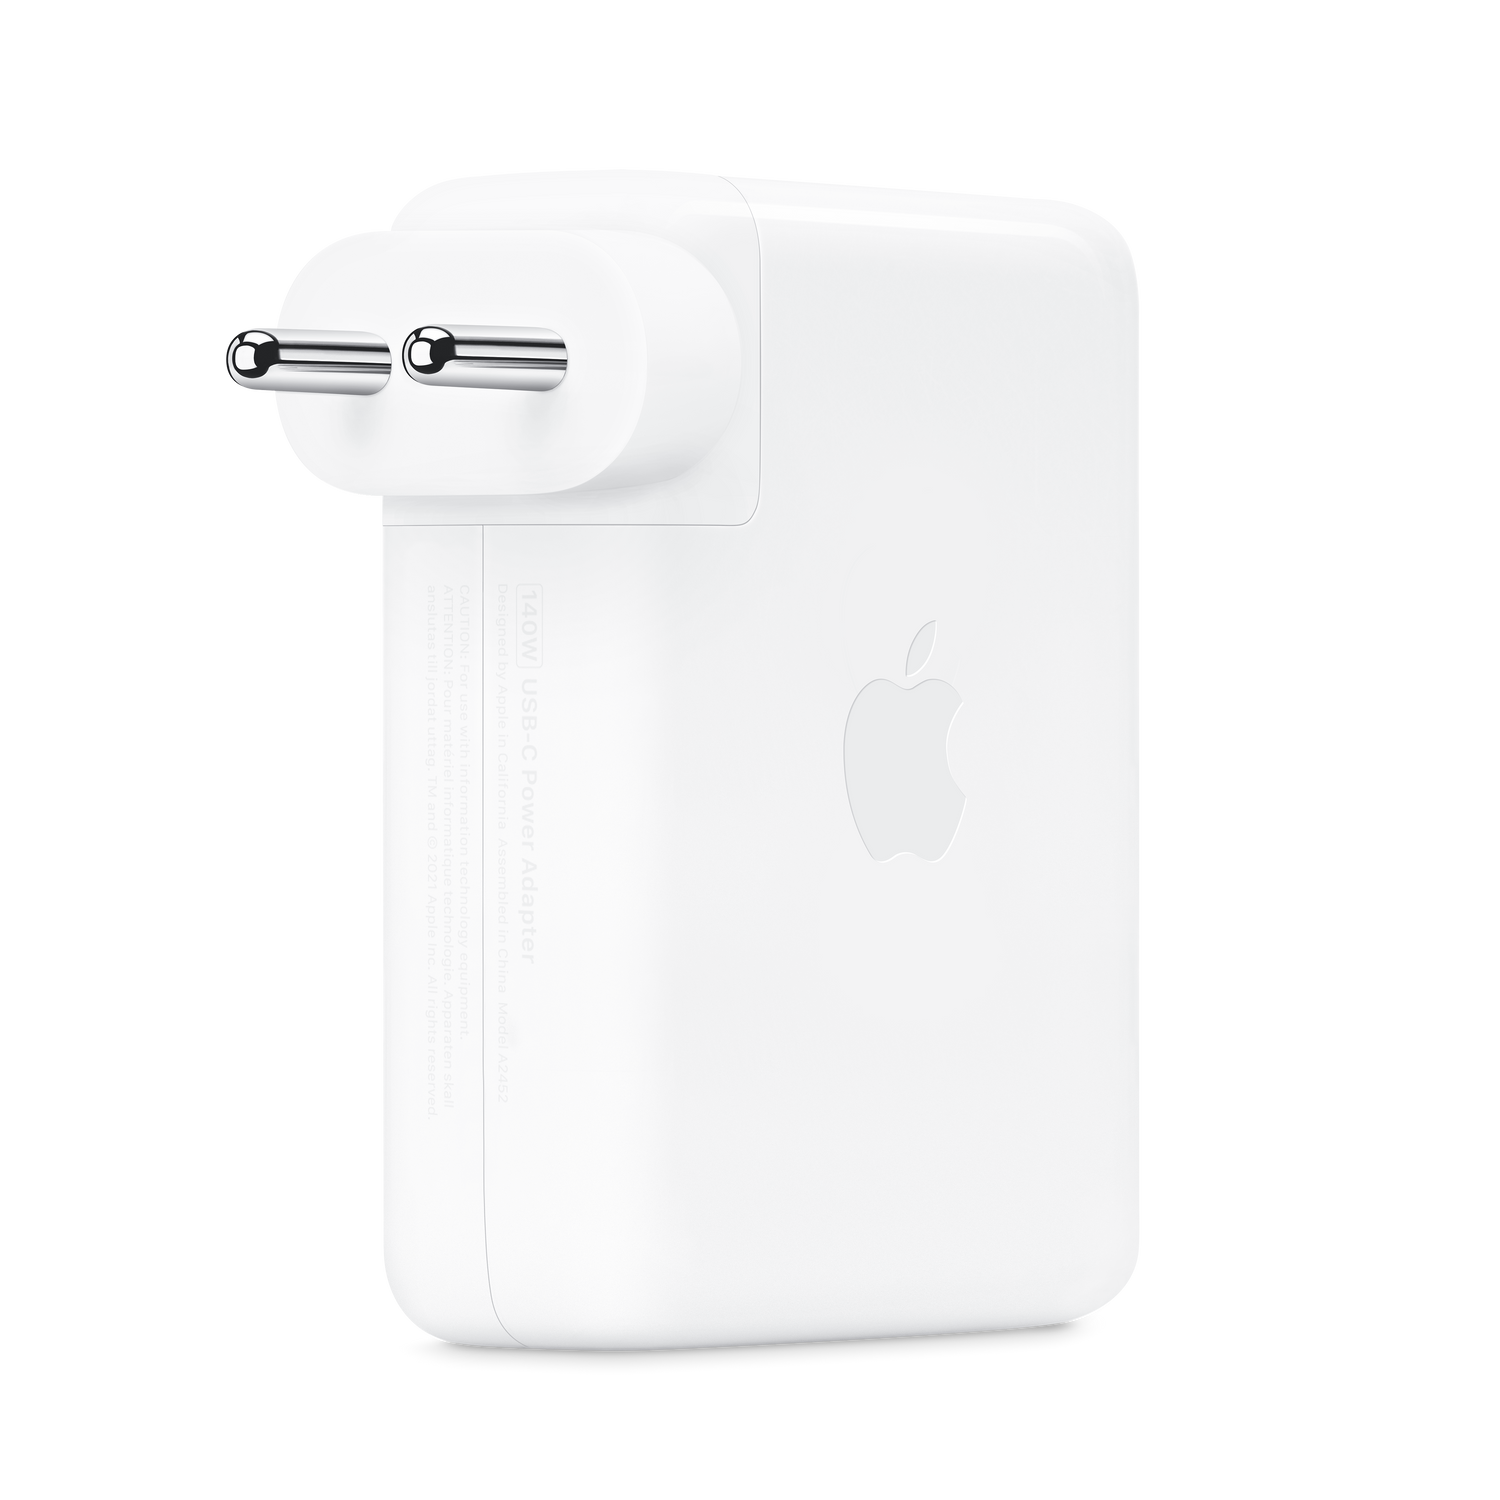 apl_ps_140W USB-C Power Adapter